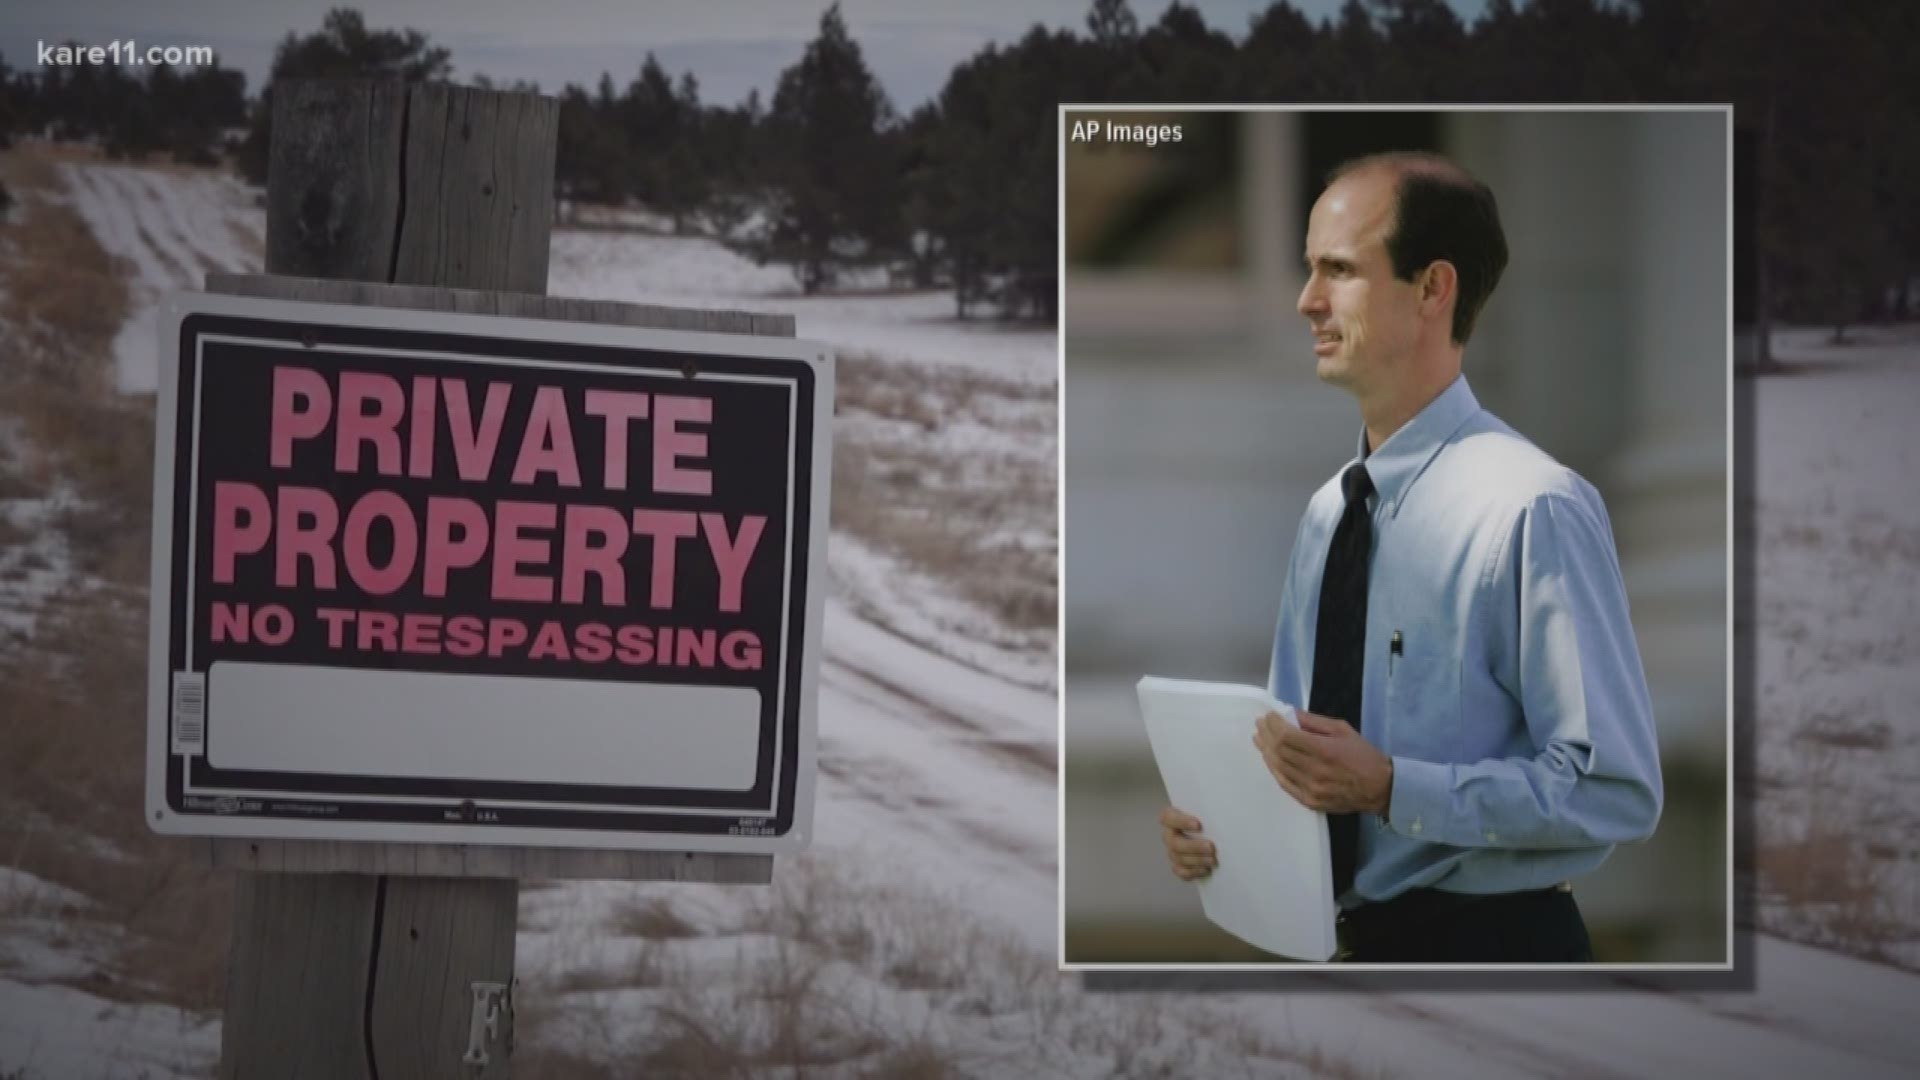 A recent land purchase by FLDS church leader sparks fear that religious compound could be planned for northern Minnesota.